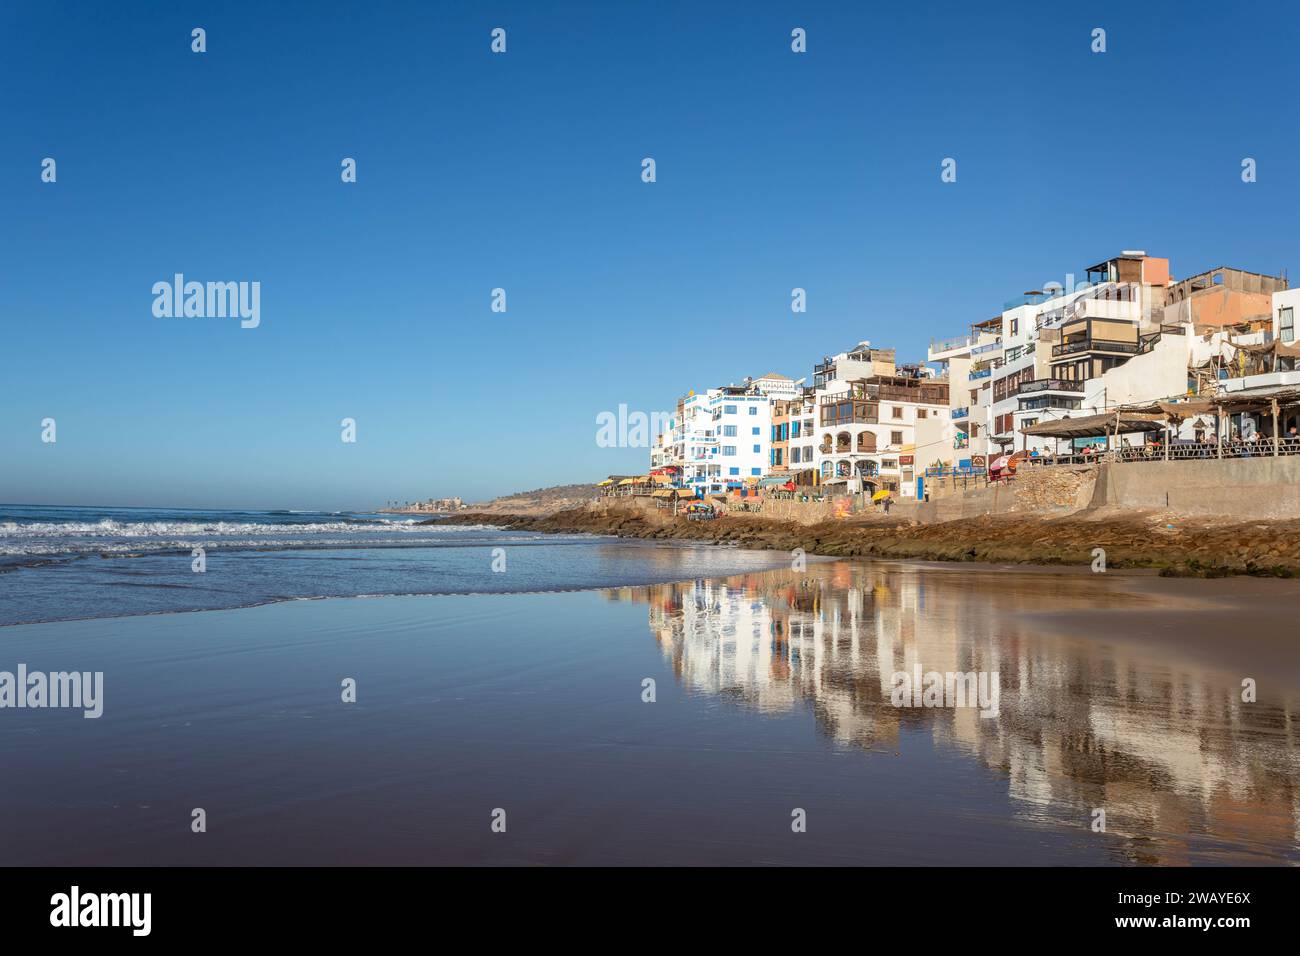 Beach front houses / cafes overlooking the Atlantic Ocean and beaches in the fishing village of Taghazout, Morocco, North Africa on a sunny day Stock Photo